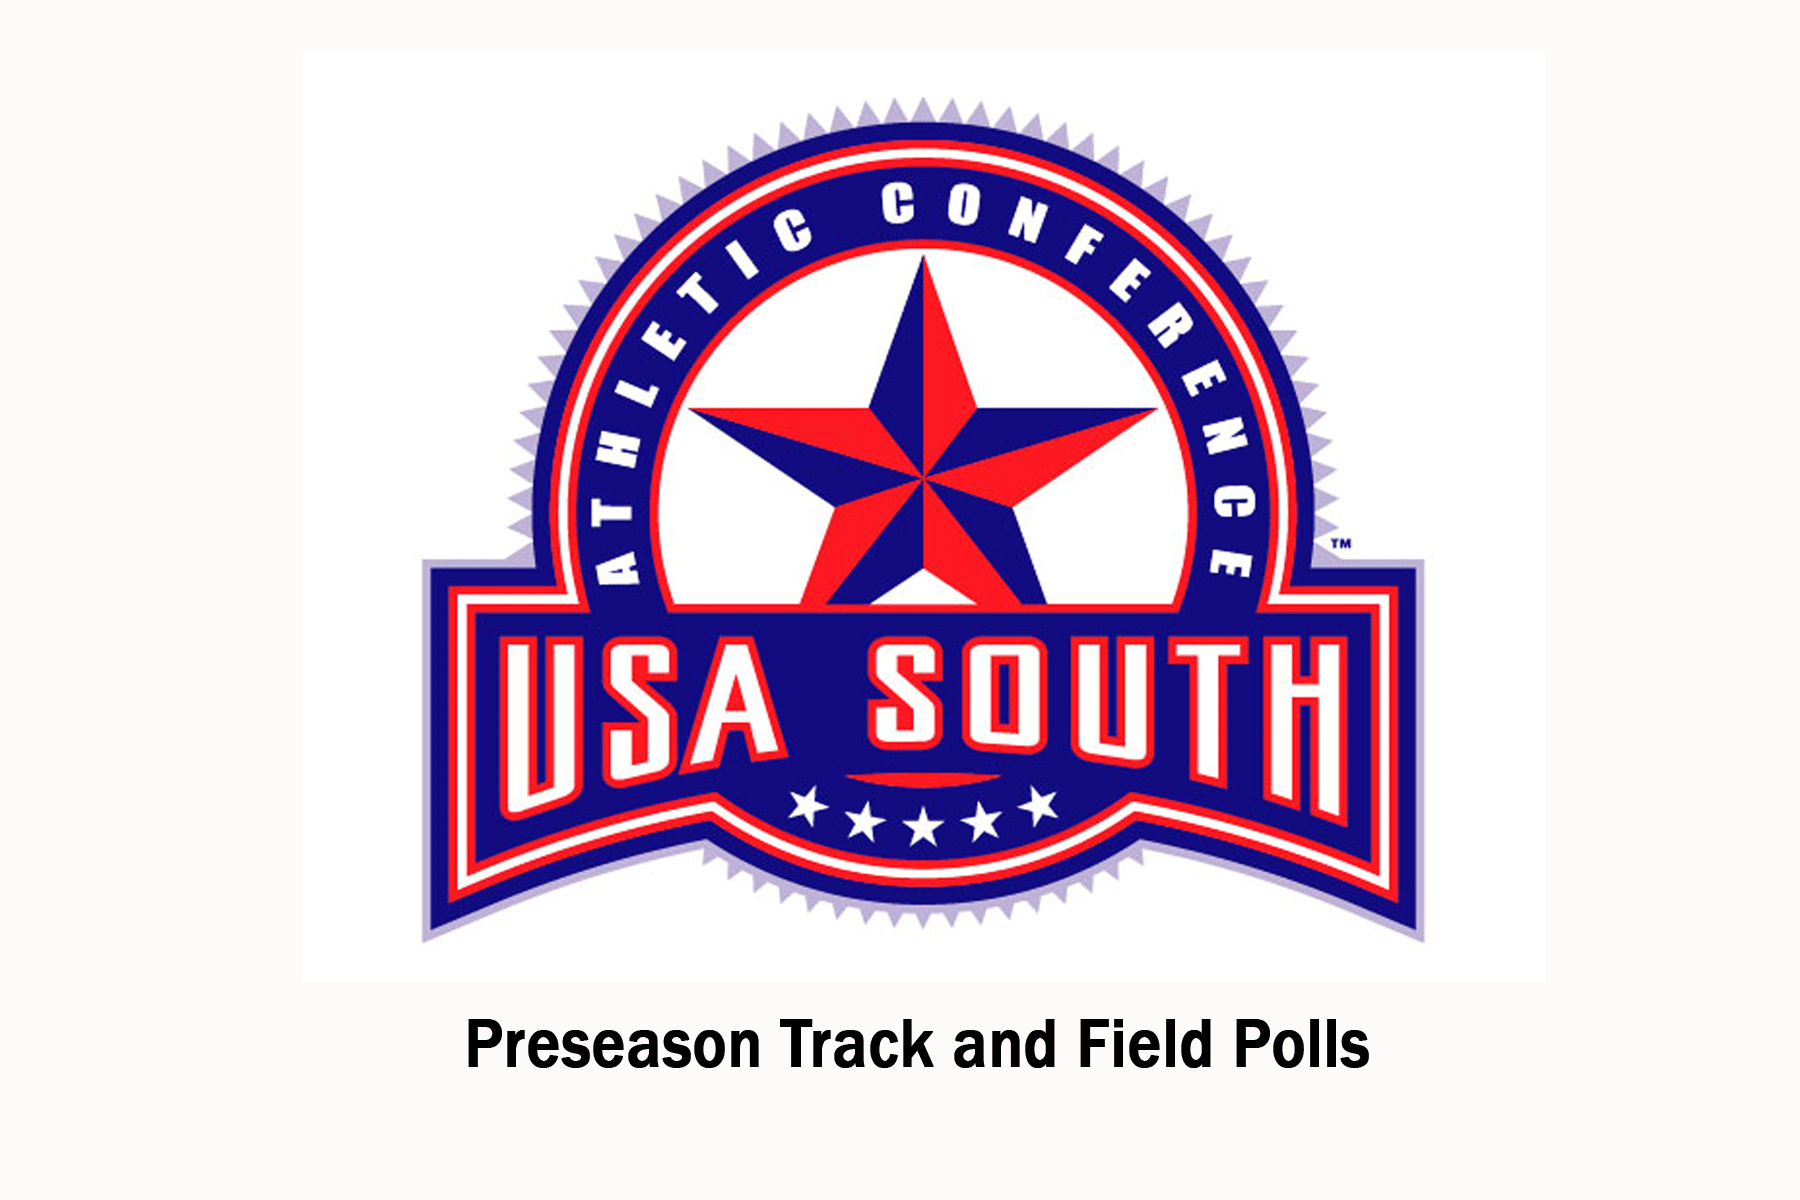 USA South releases preseason track and field polls